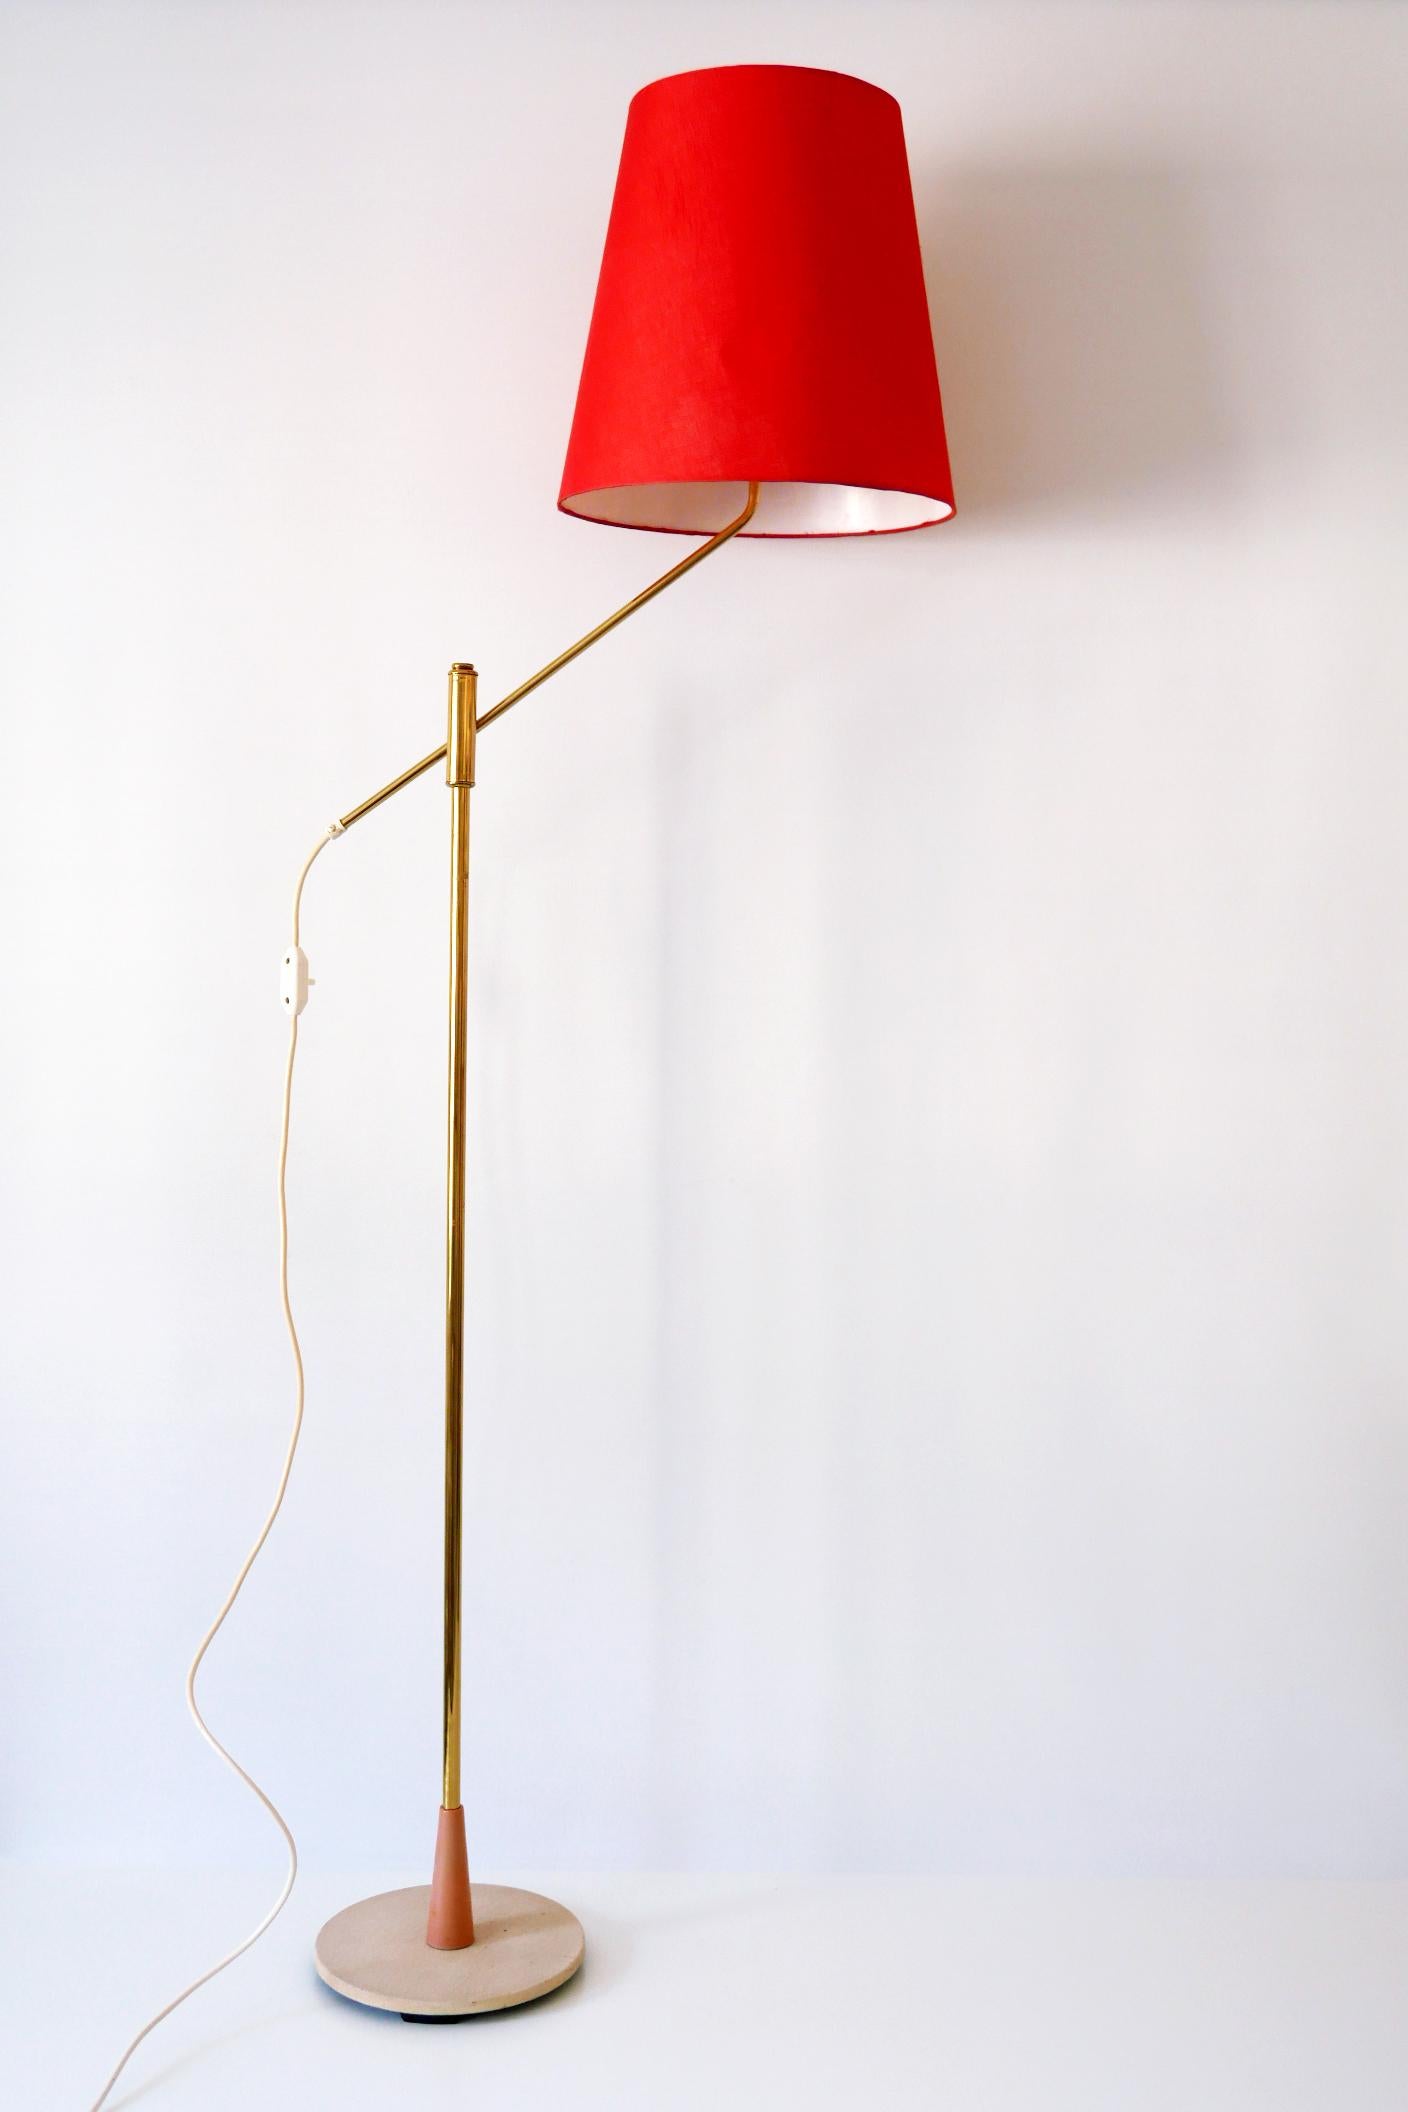 Mid-20th Century Exceptional, Elegant and Adjustable Mid-Century Modern Floor Lamp 1950s, Germany For Sale